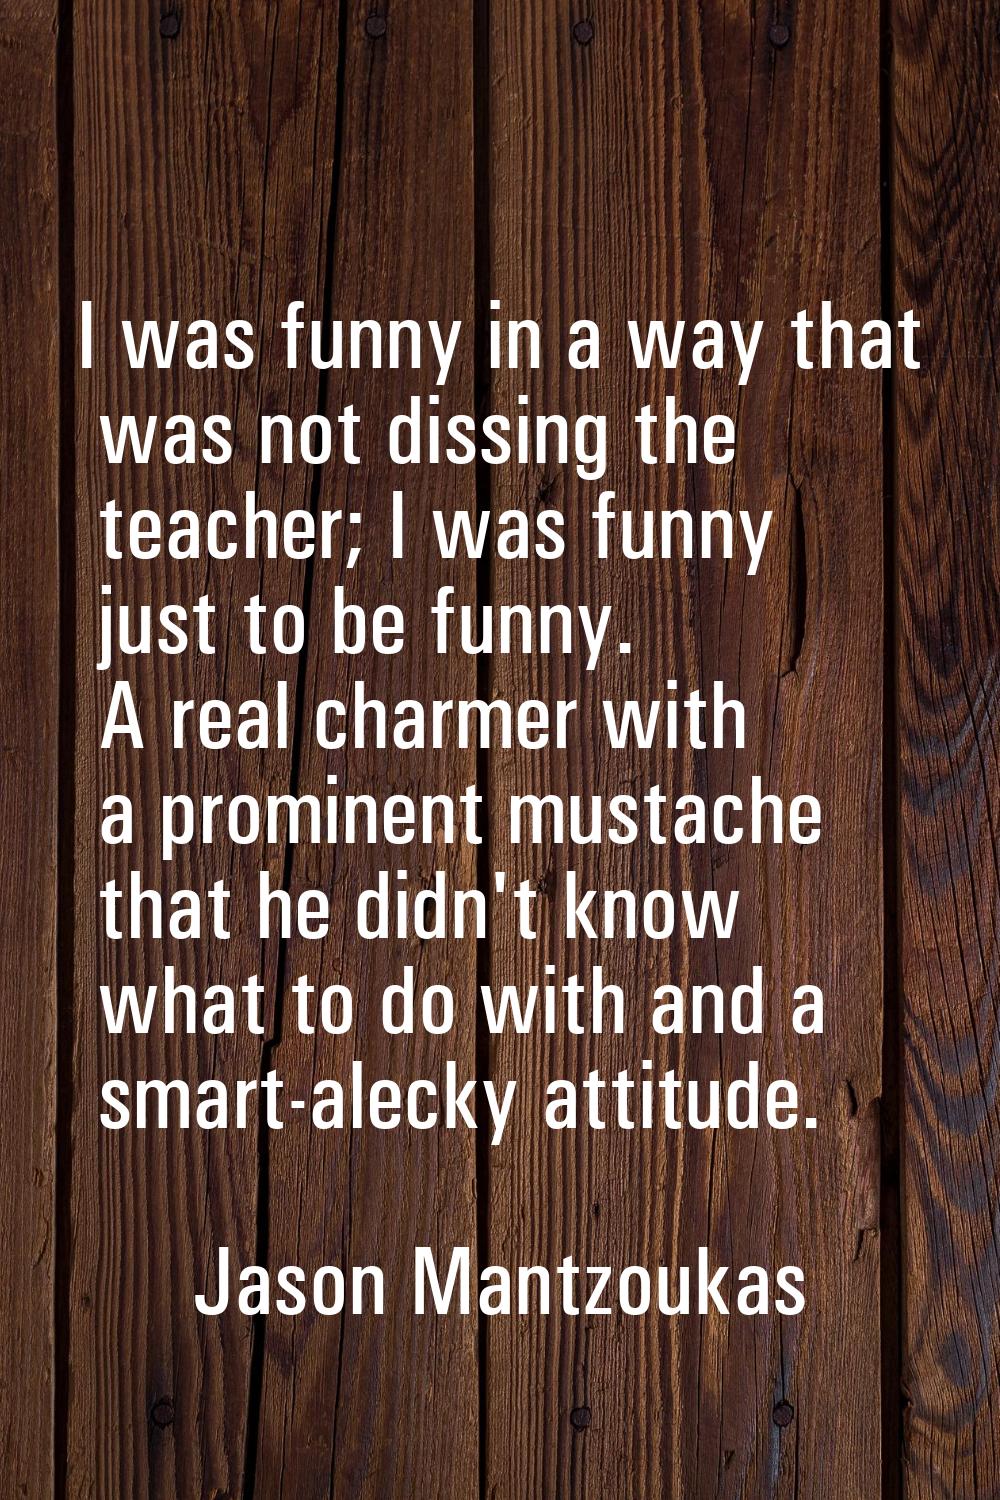 I was funny in a way that was not dissing the teacher; I was funny just to be funny. A real charmer